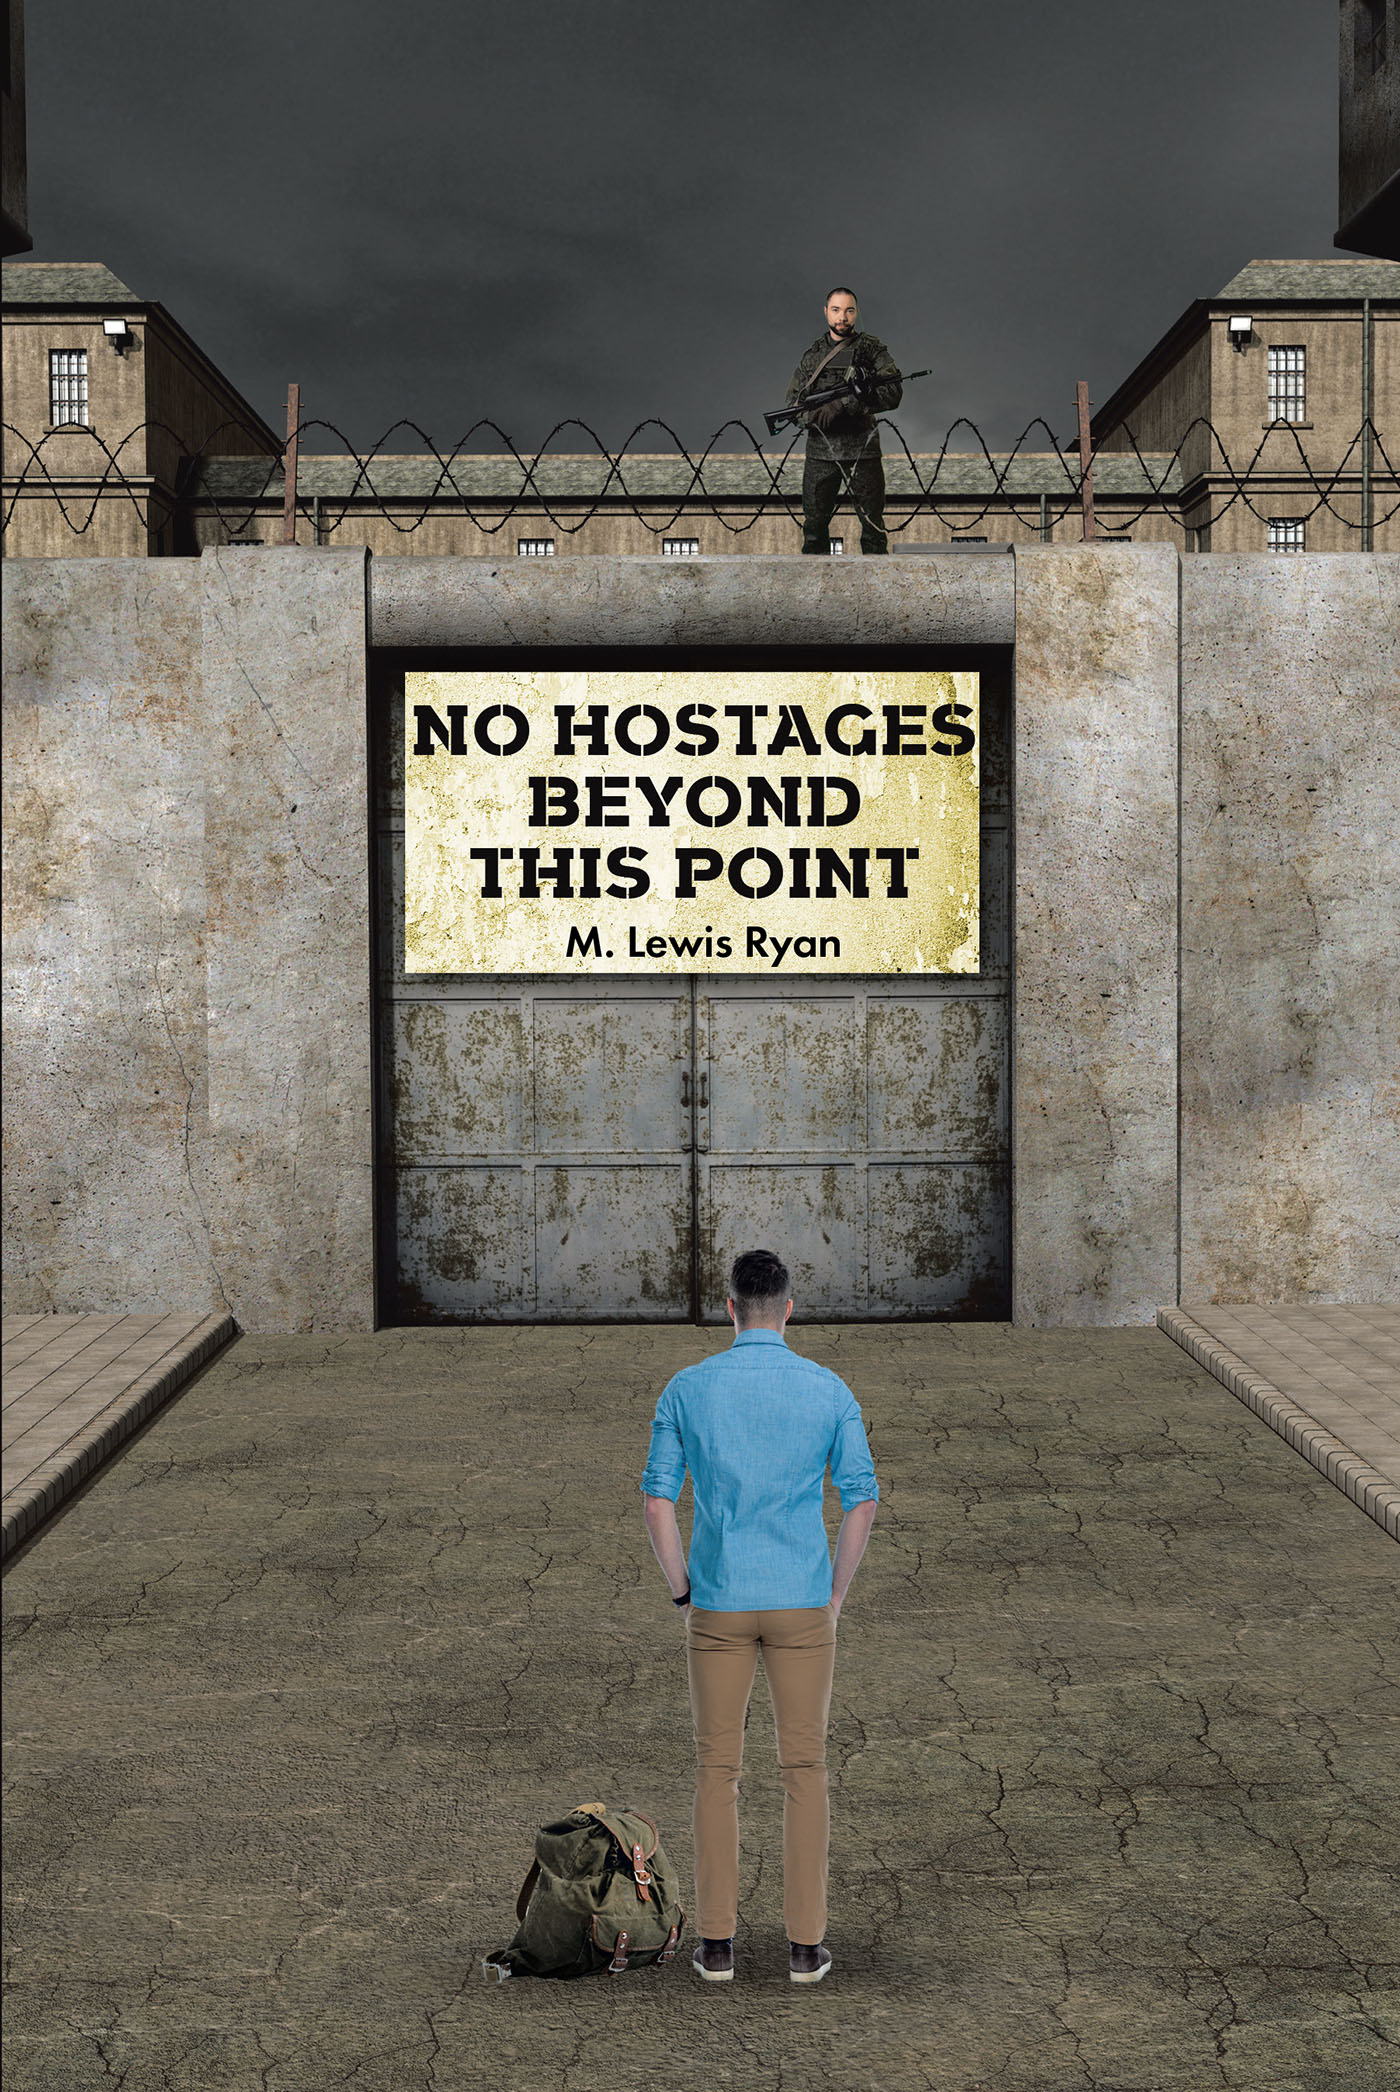 M. Lewis Ryan’s Newly Released "No Hostages Beyond This Point" is a Gripping Story of How the Power of Choice Affects Us All